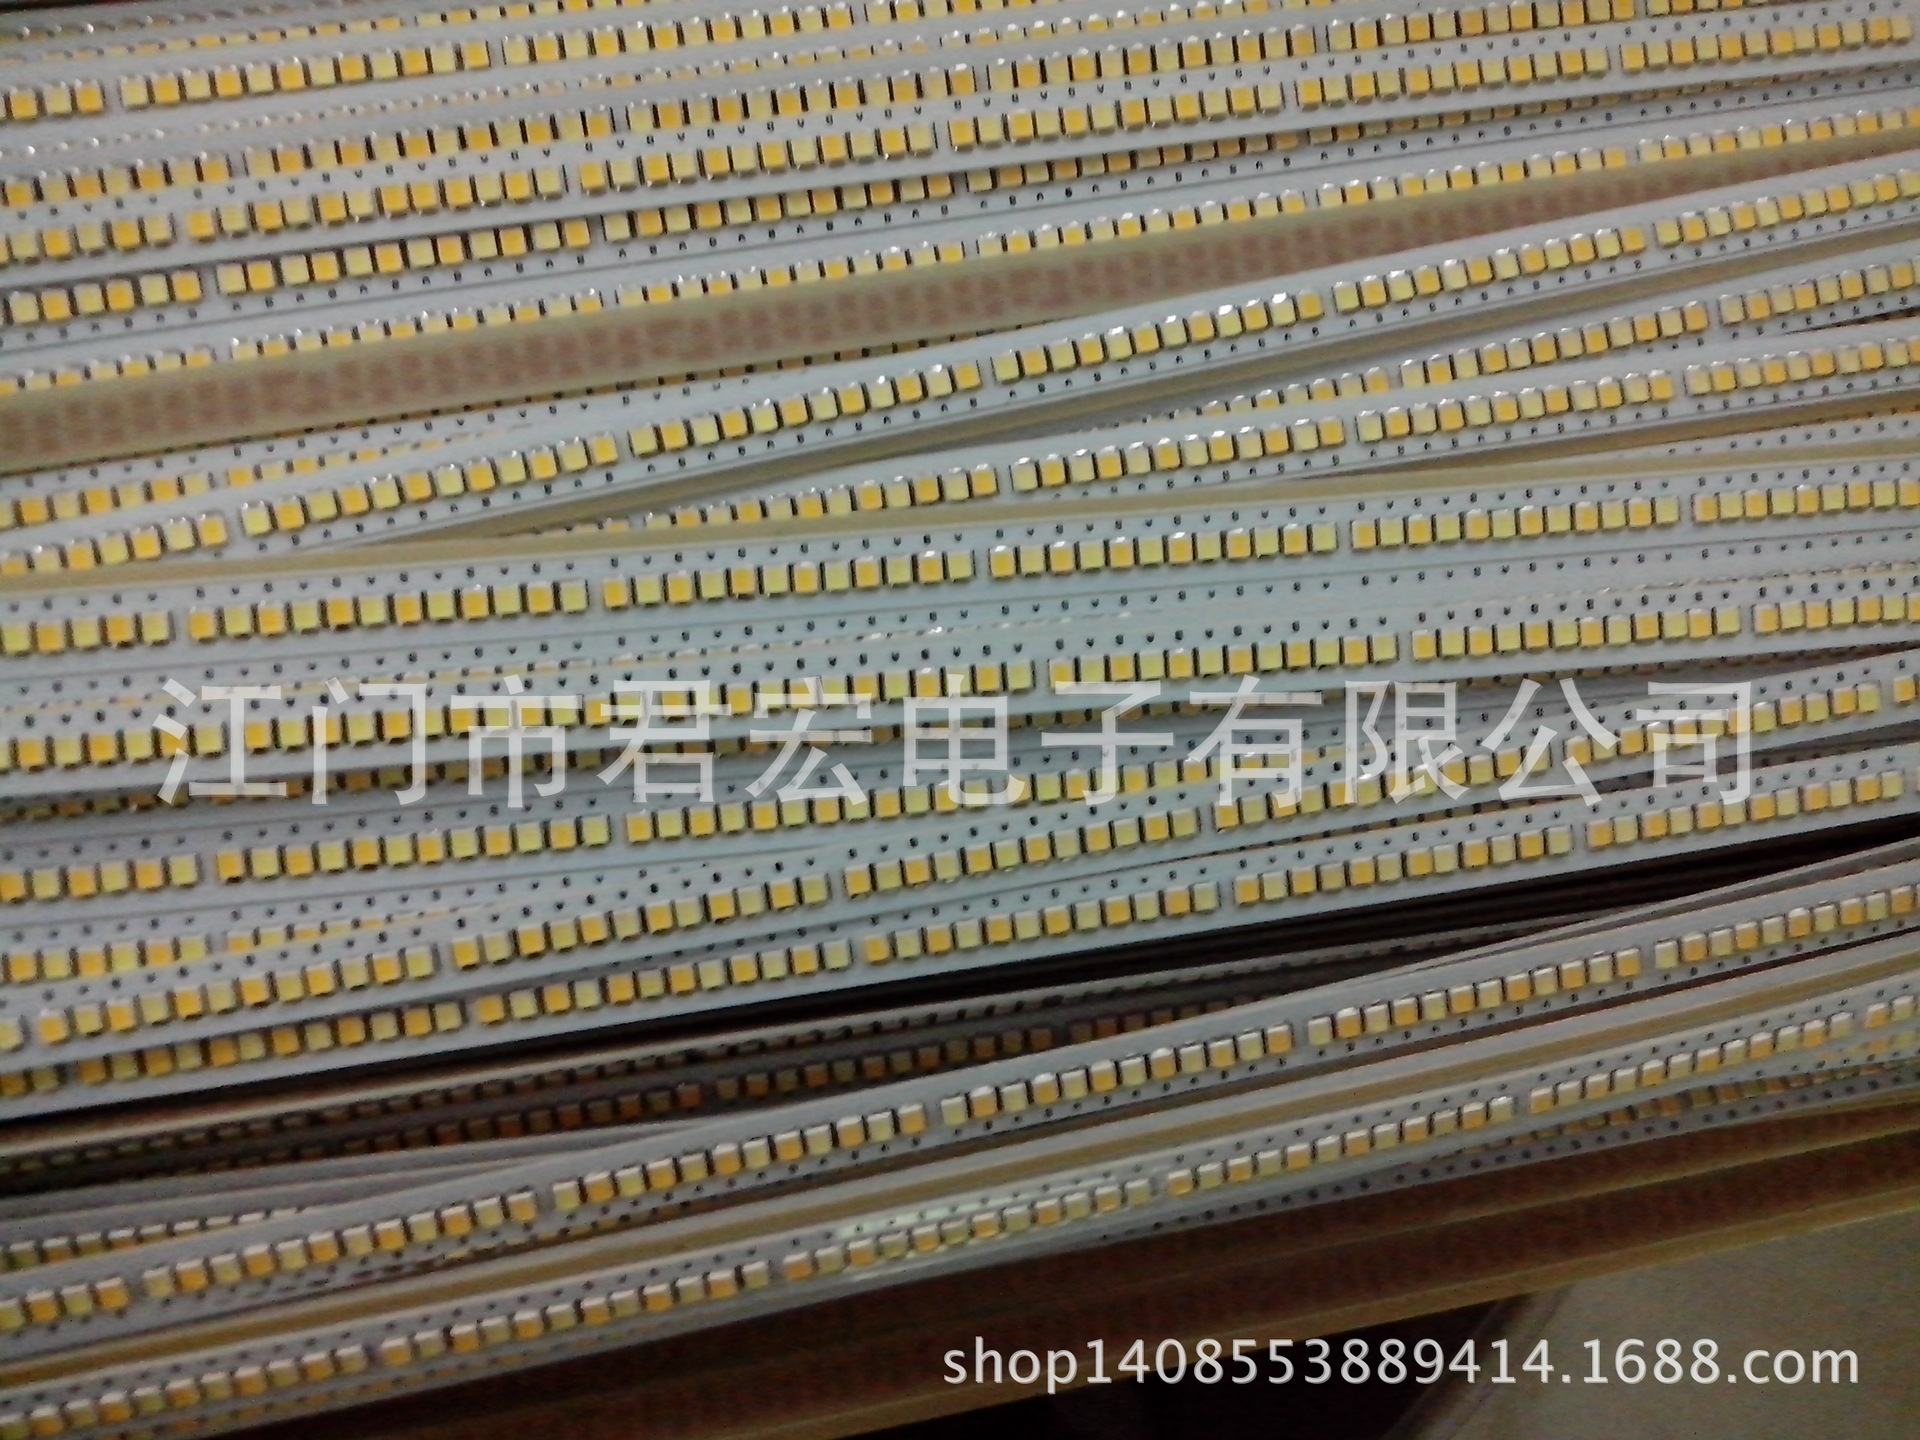 High thermal conductivity 1.2m T8 Aluminum plate LED Circuit boards Manufactor Focus